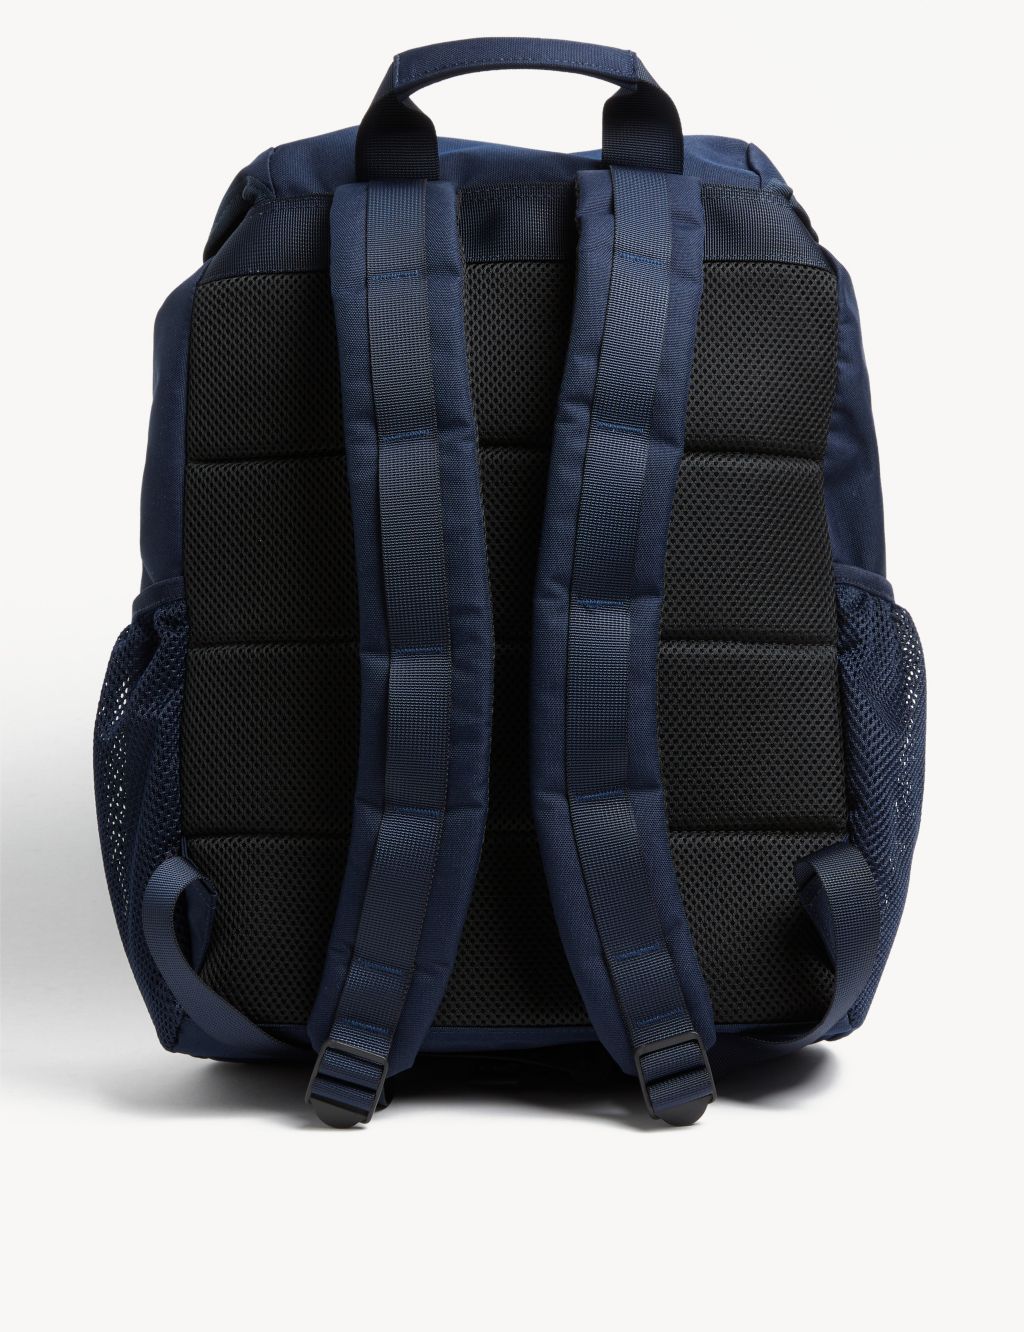 Pro-Tect™ Scuff Resistant Backpack image 4